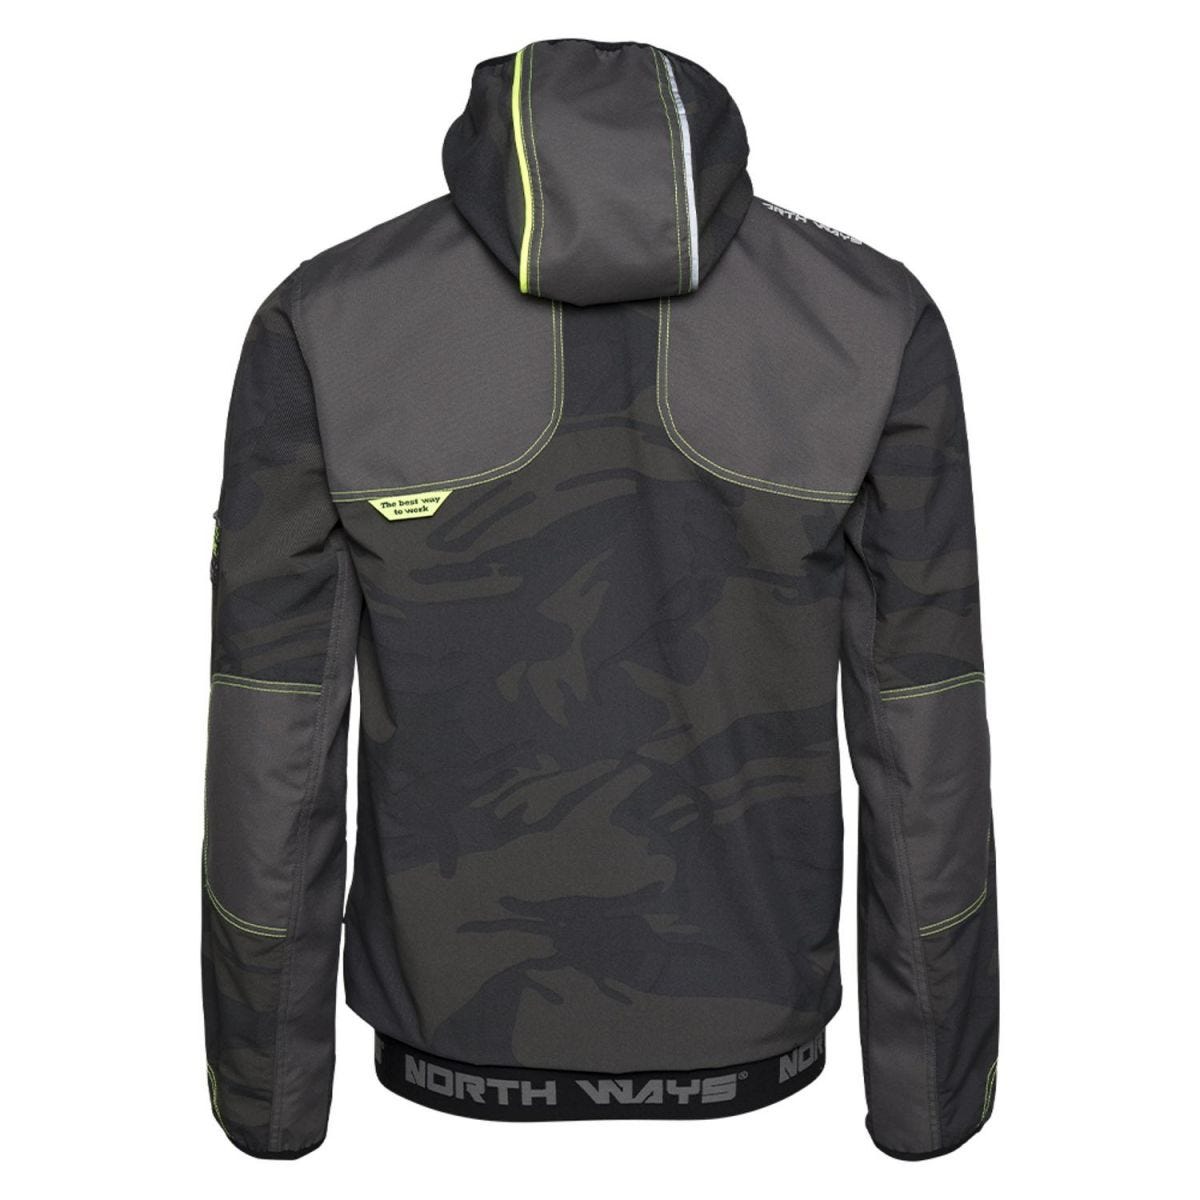 Blouson de travail multipoches Irons woodland - North Ways - Taille XL 2